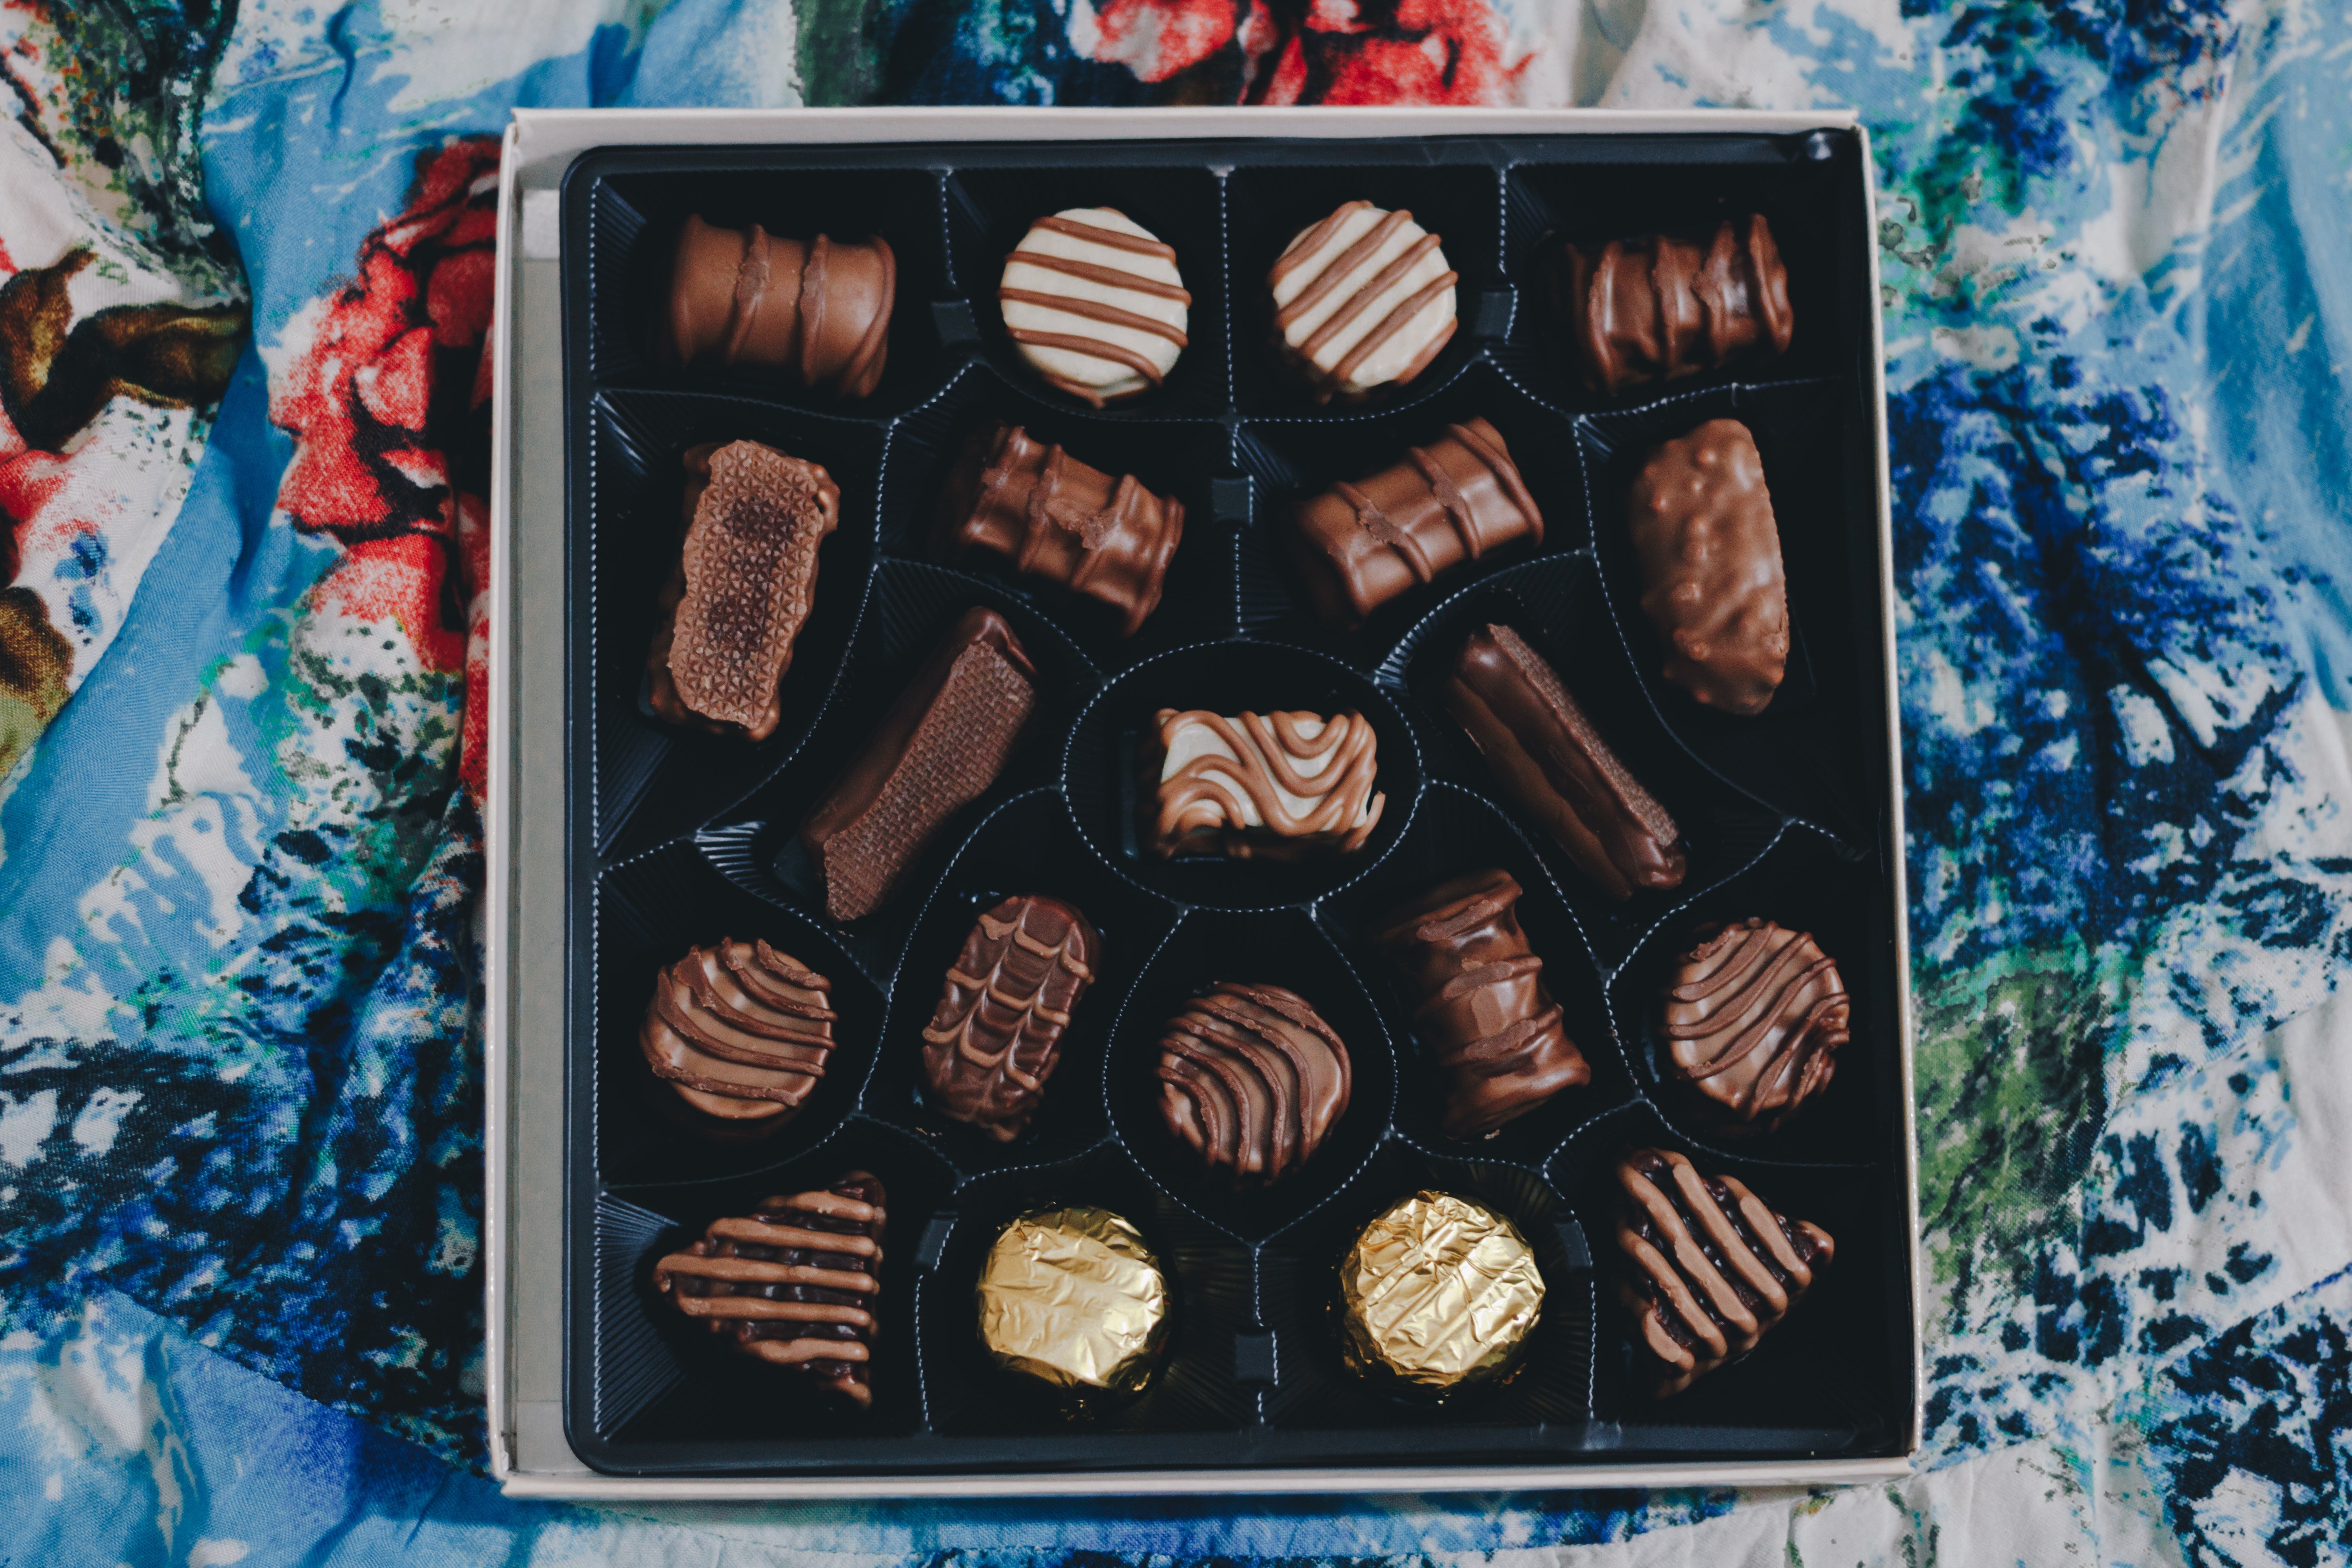 Judy didn't have enough money for the chocolates | Photo: Unsplash